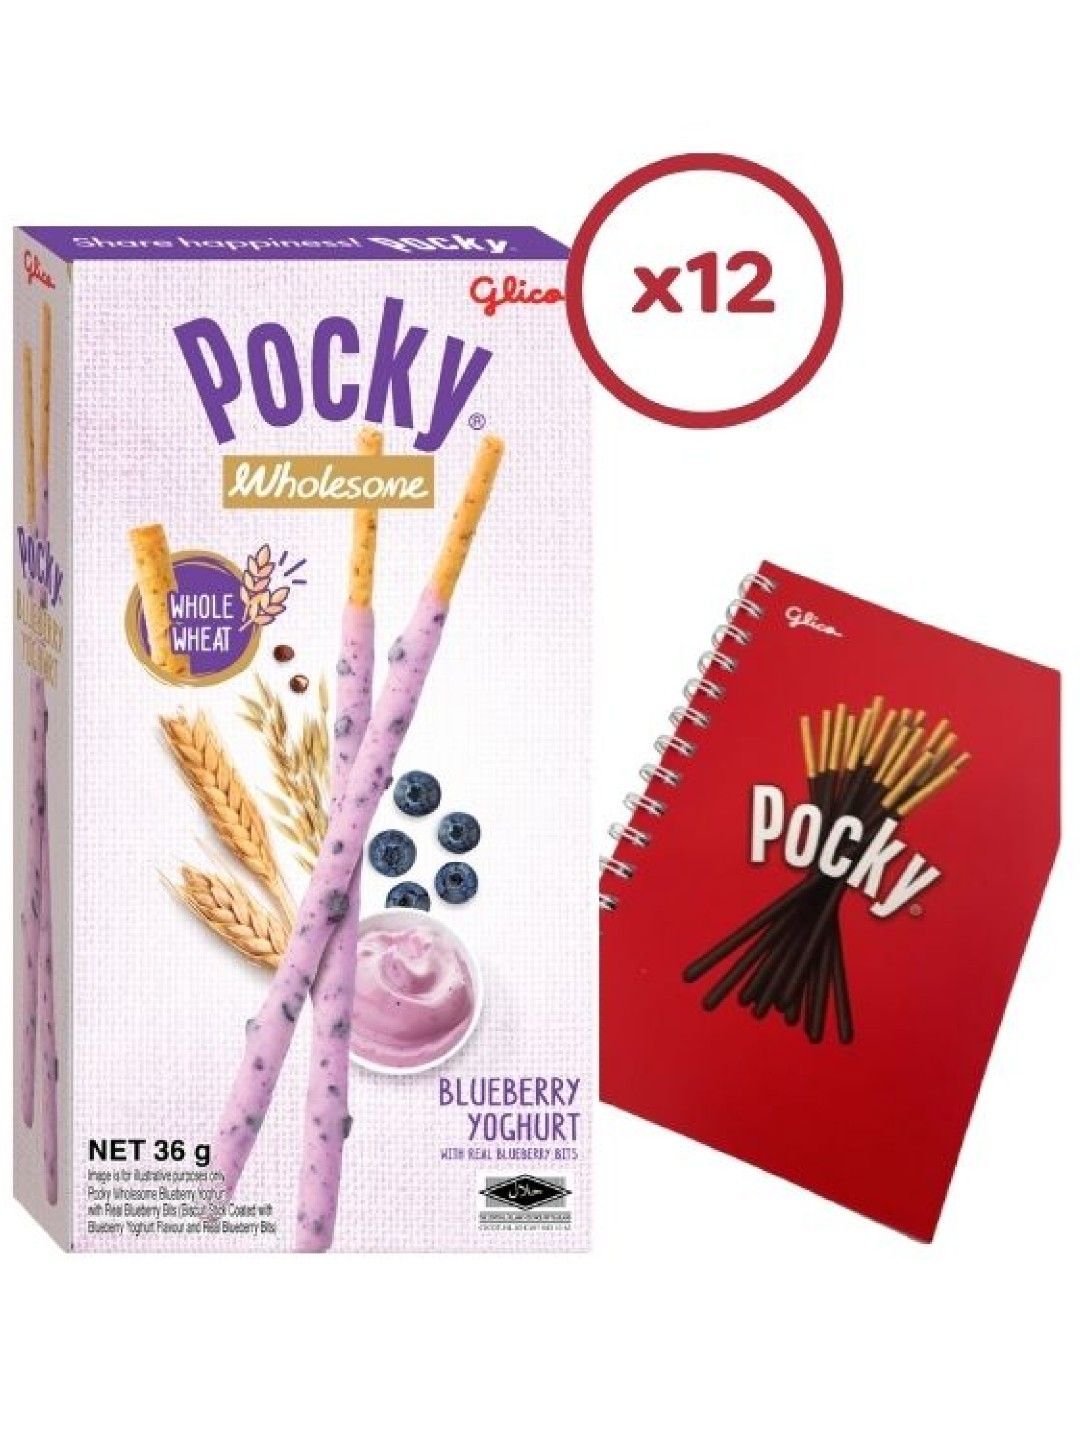 Pocky Wholesome Blueberry Yoghurt Biscuit Sticks (Bundle of 12) w/ FREE Glico Notebook (No Color- Image 1)